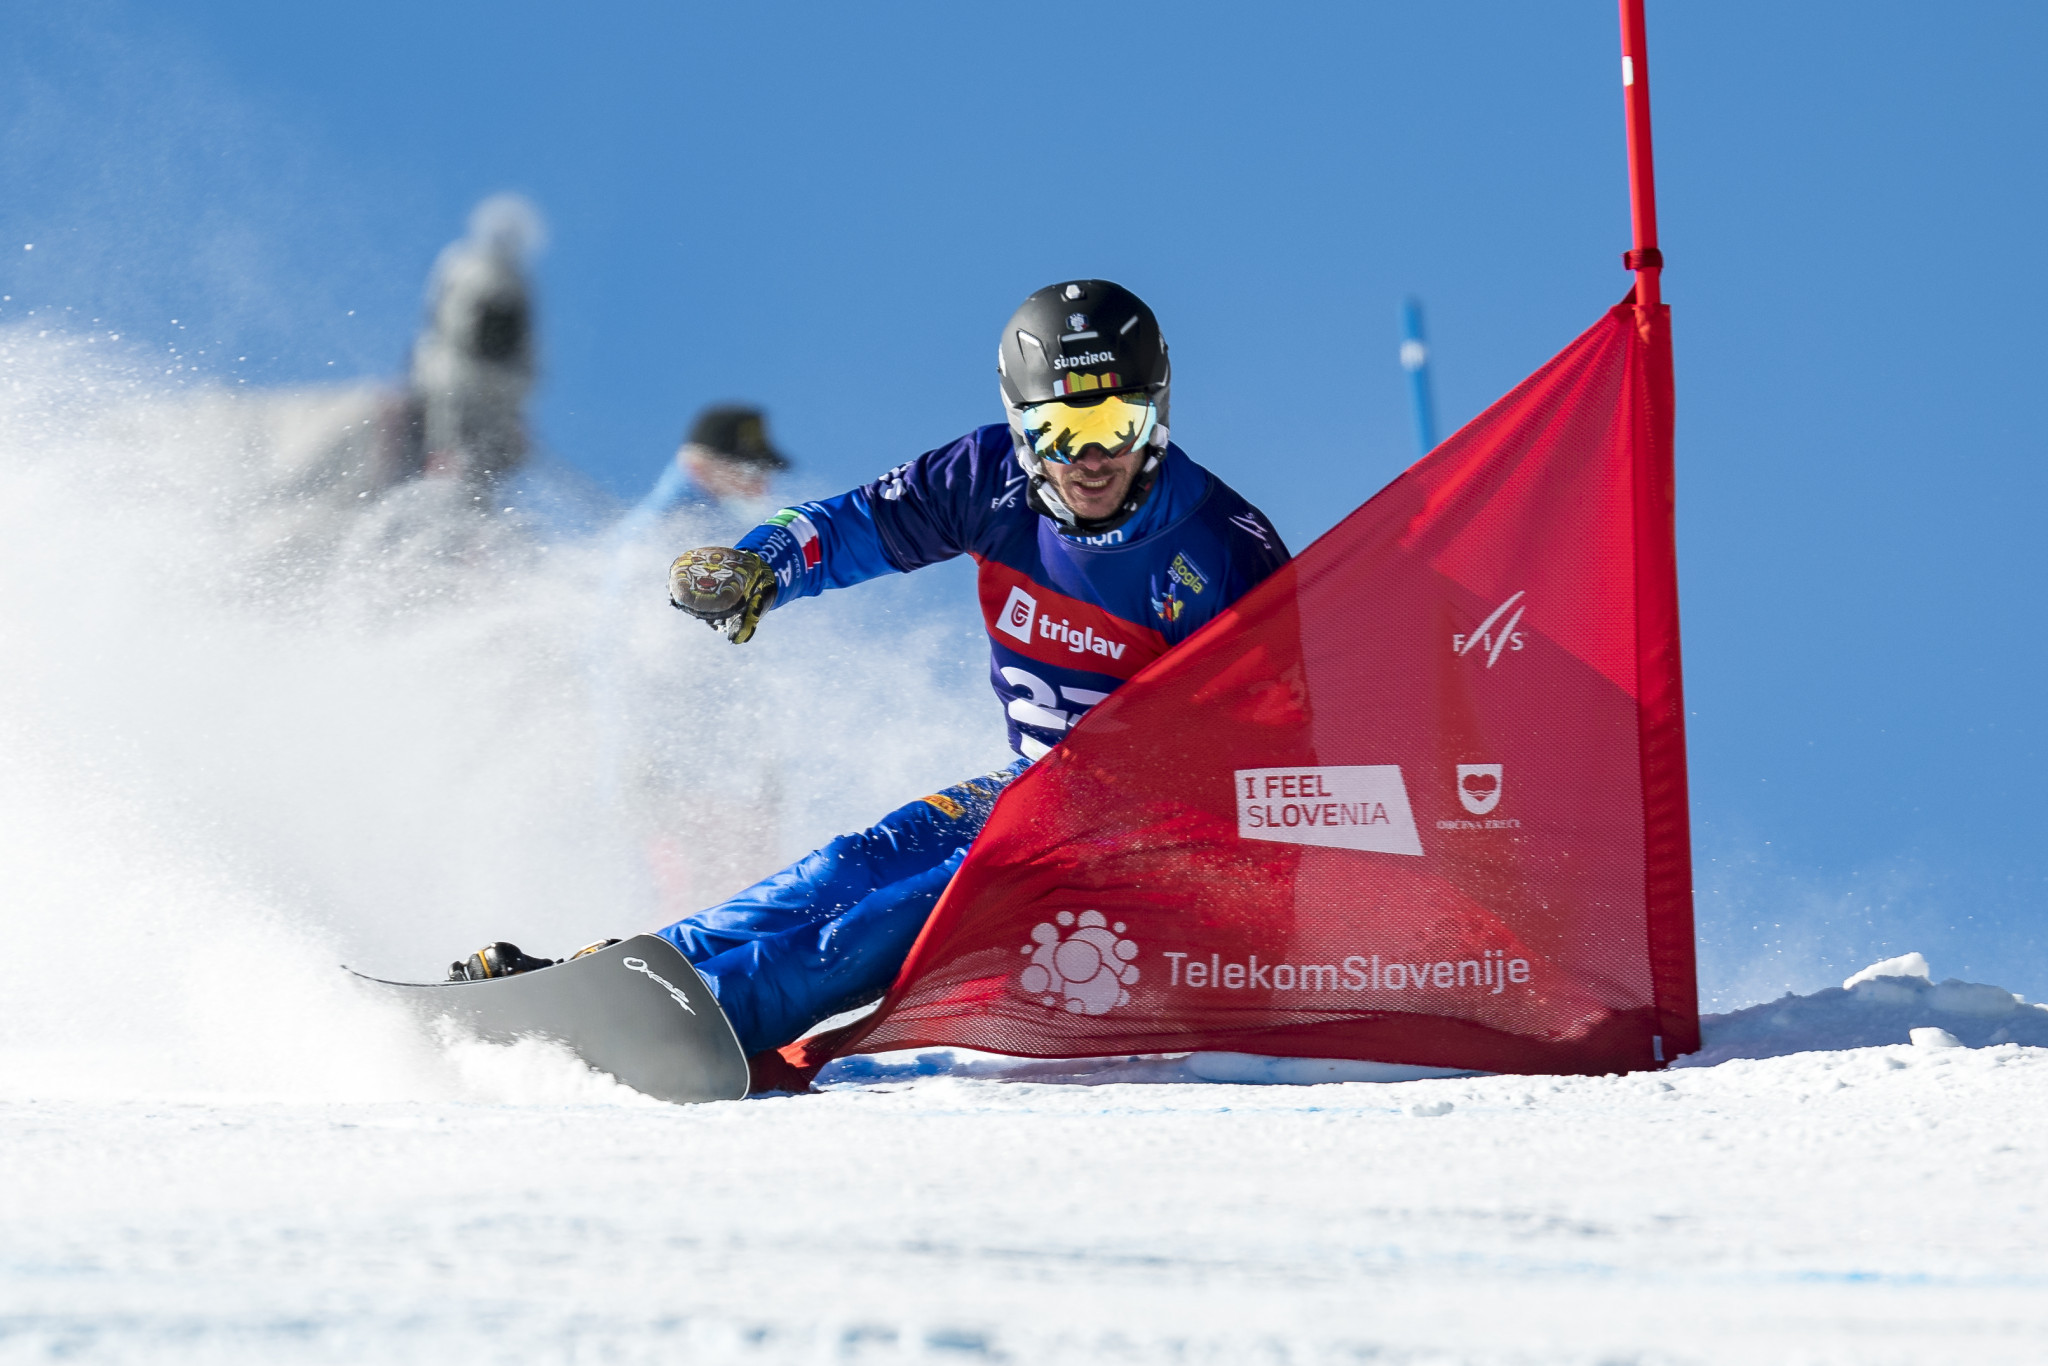 FIS Snowboard Alpine Sub Committee to press for parallel slalom being added to Milan Cortina 2026 programme